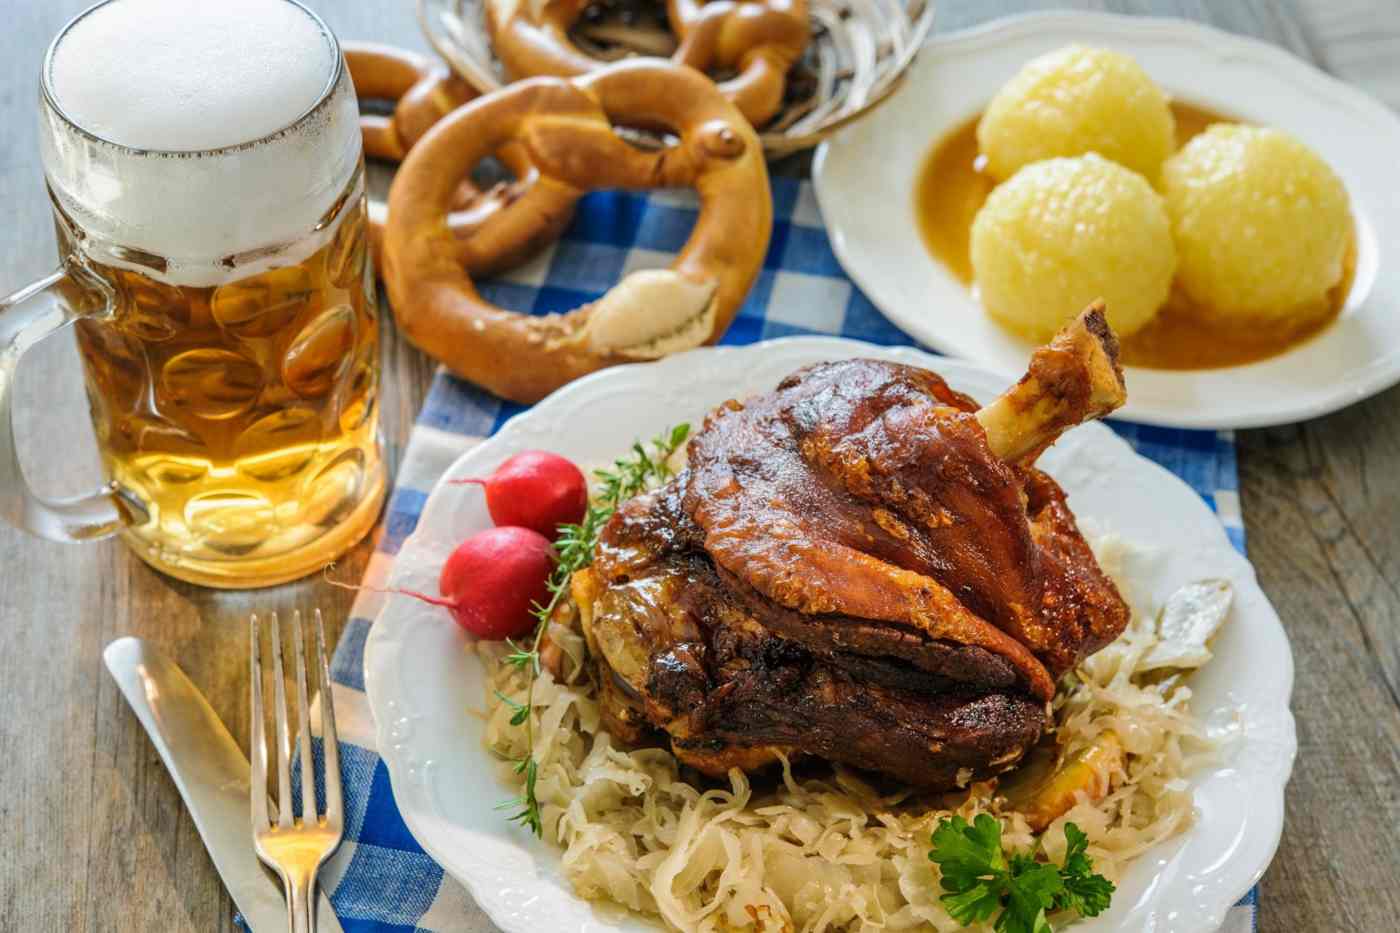 Oktoberfest recipes for delicate wax with sauerkraut and dumplings are served